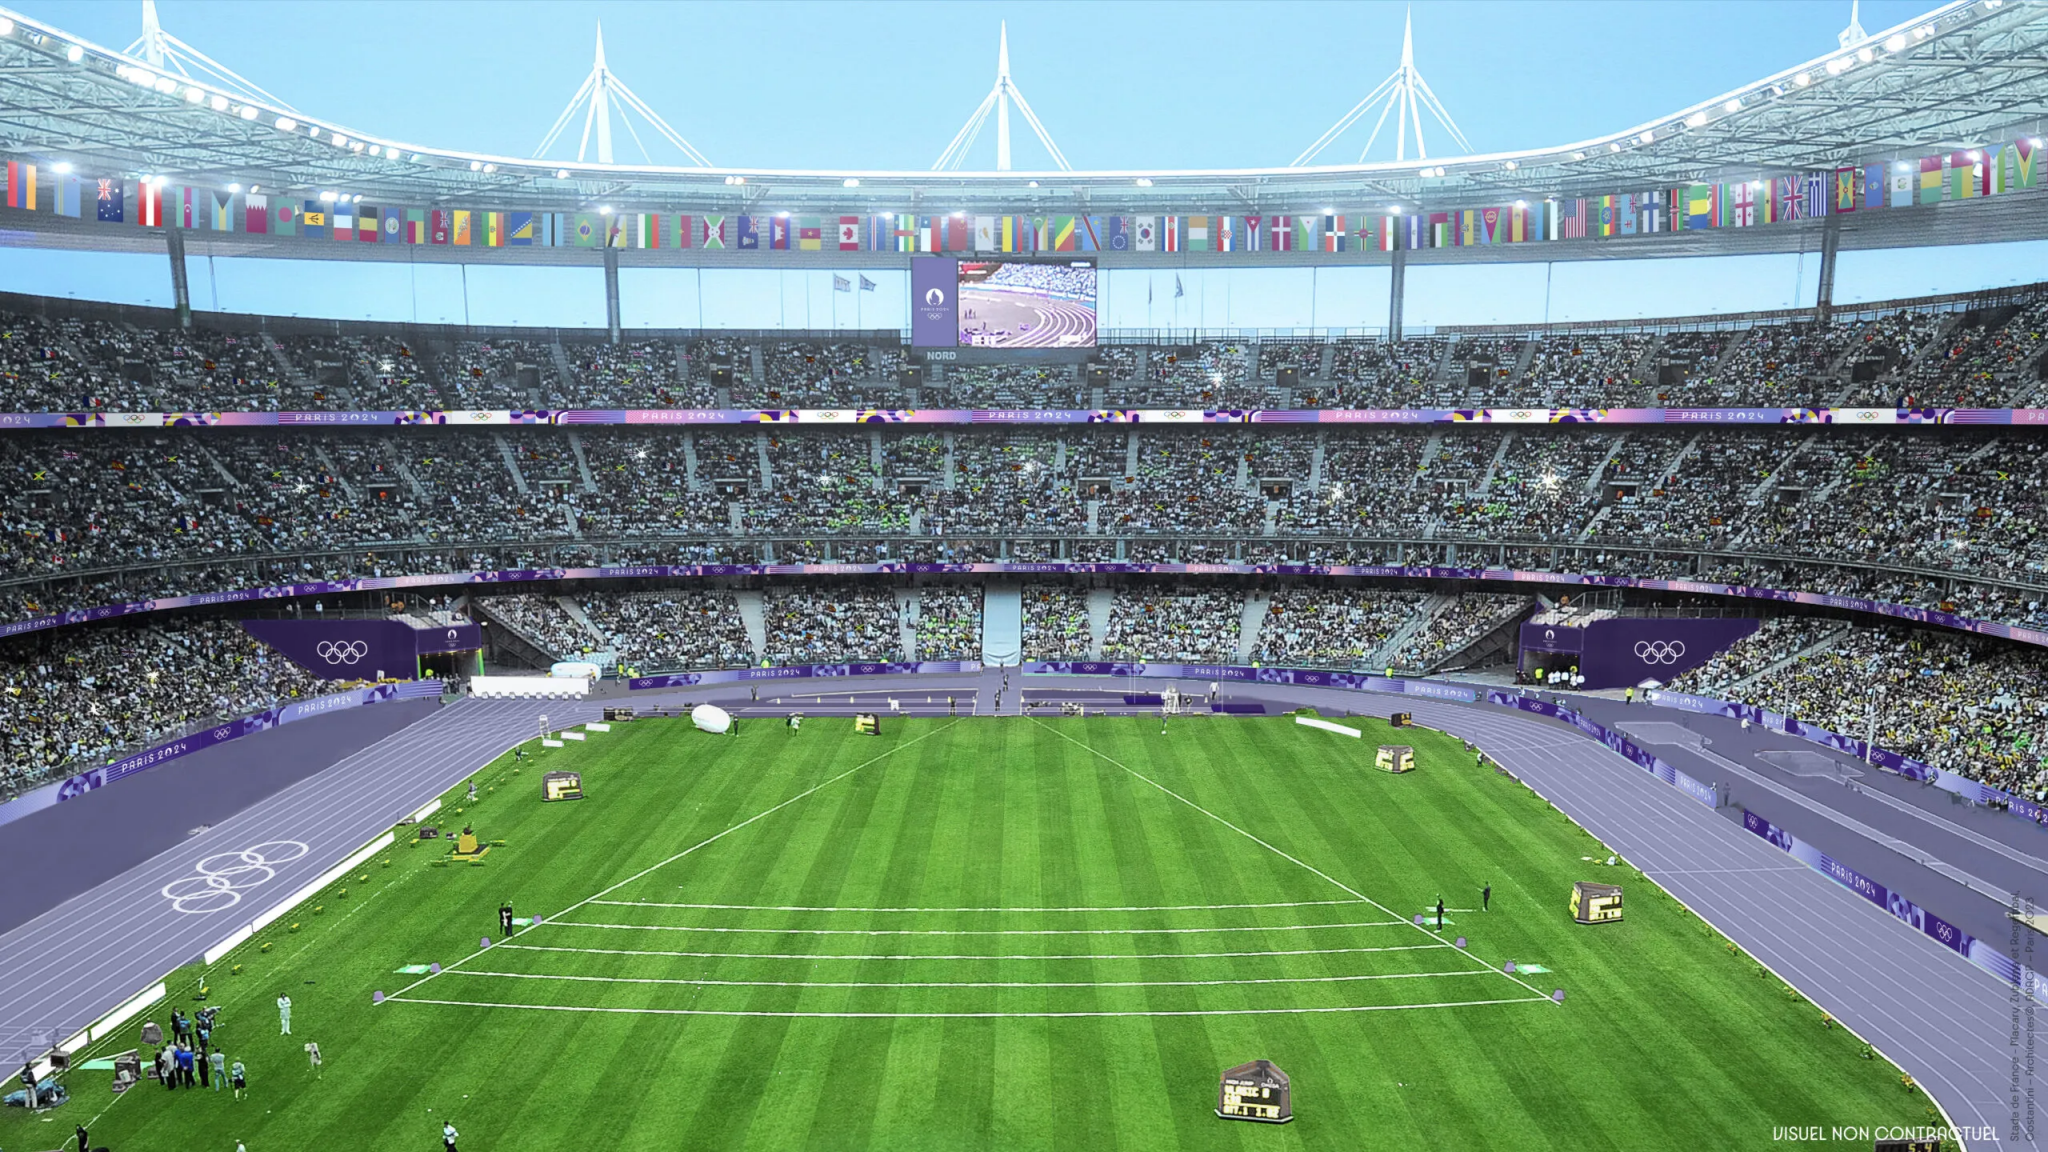 The Stade de France is set to host athletics, rugby sevens and the Closing Ceremony during next year's Olympic Games in Paris ©Paris 2024